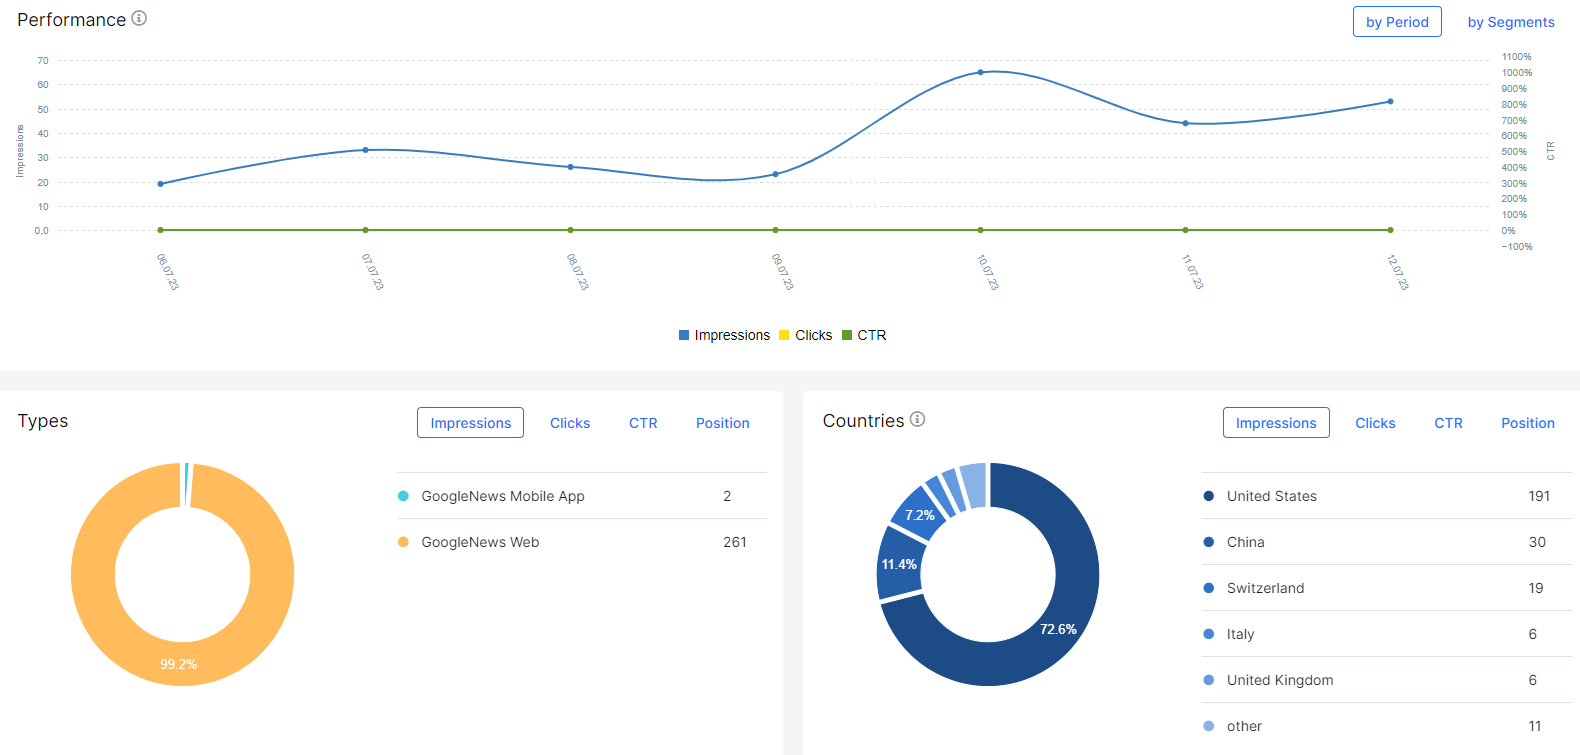 Product Update. Google News data is now available for analysis in JetOctopus - JetOctopus SEO Analyzer - 1